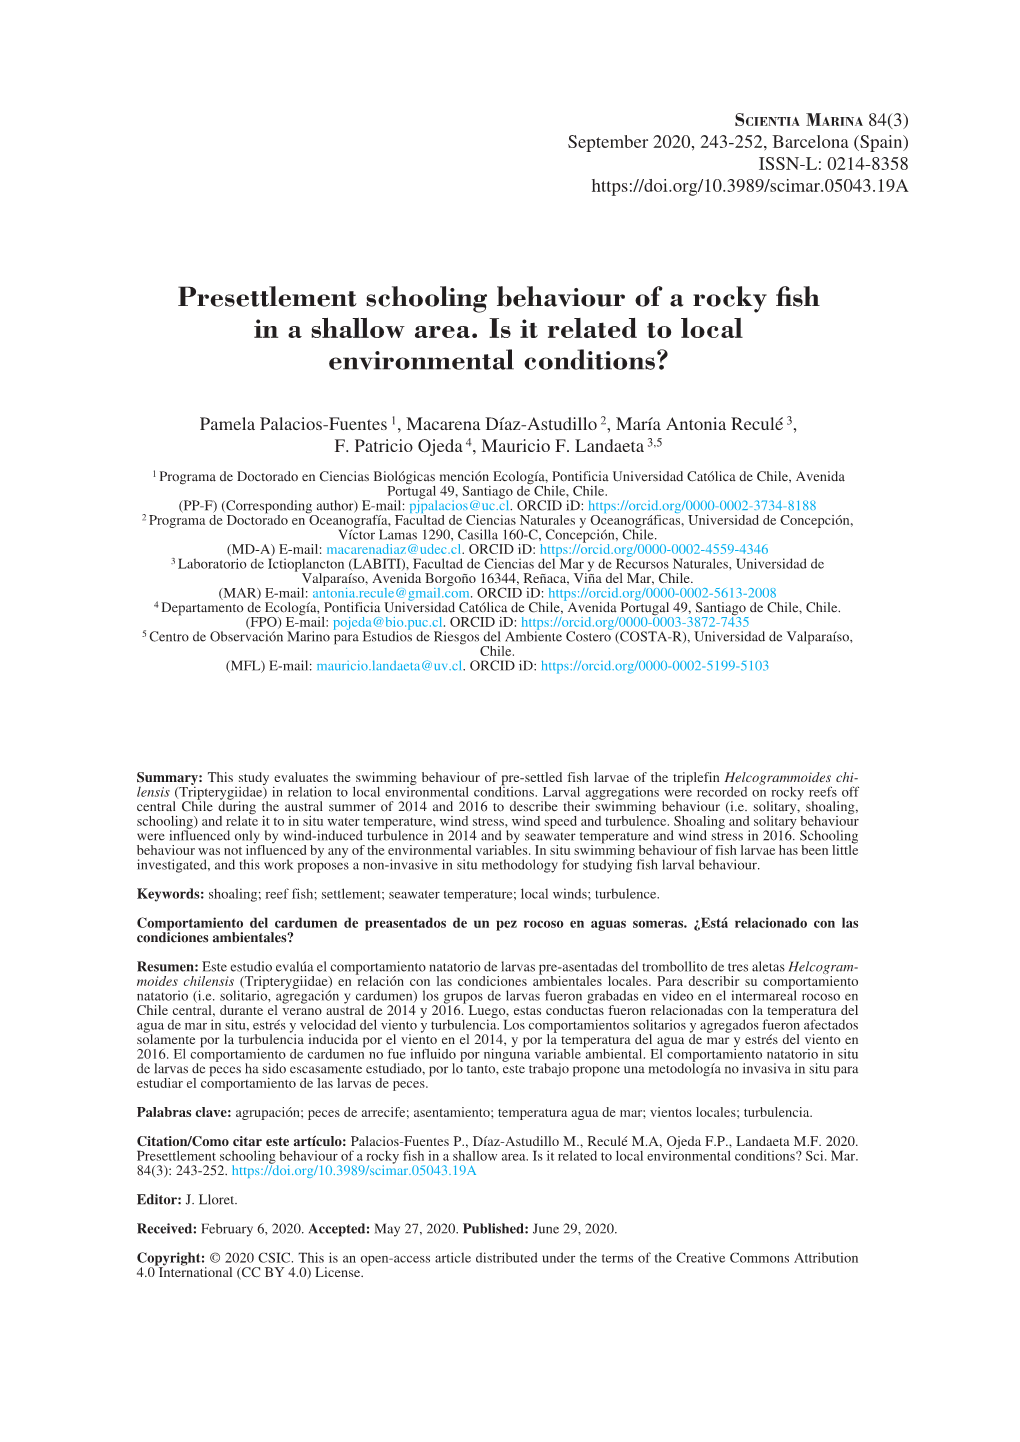 Presettlement Schooling Behaviour of a Rocky Fish in a Shallow Area